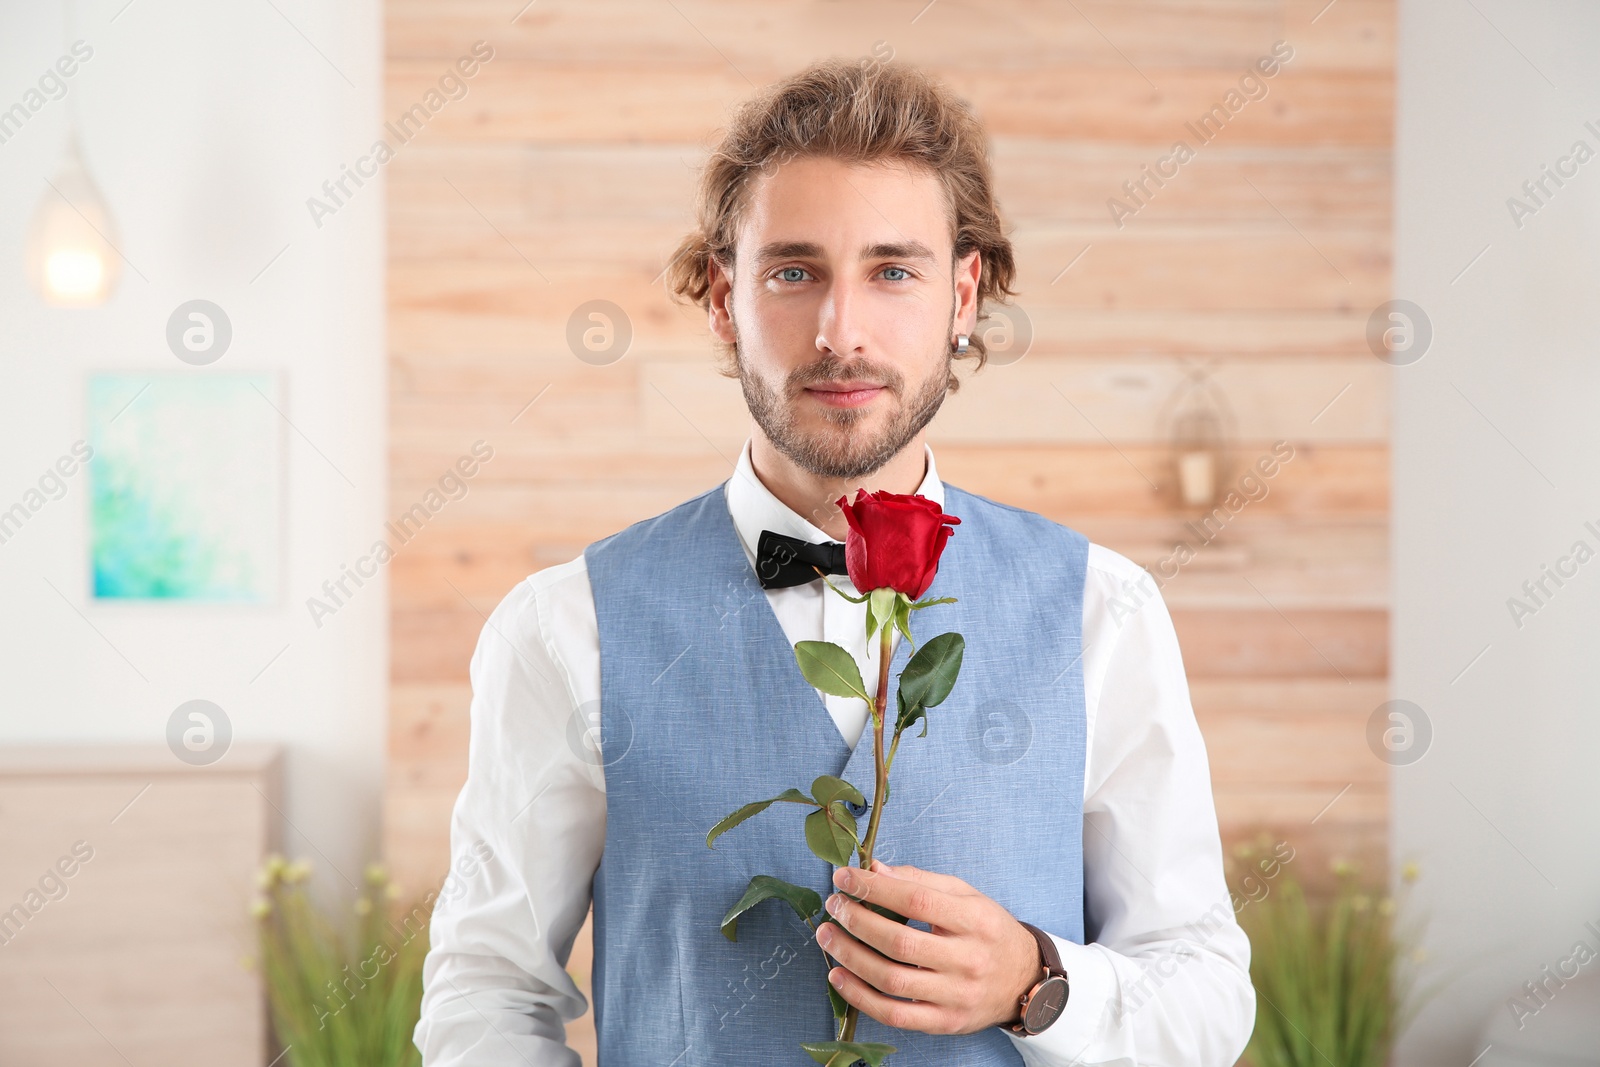 Photo of Handsome man in formal wear holding red rose indoors